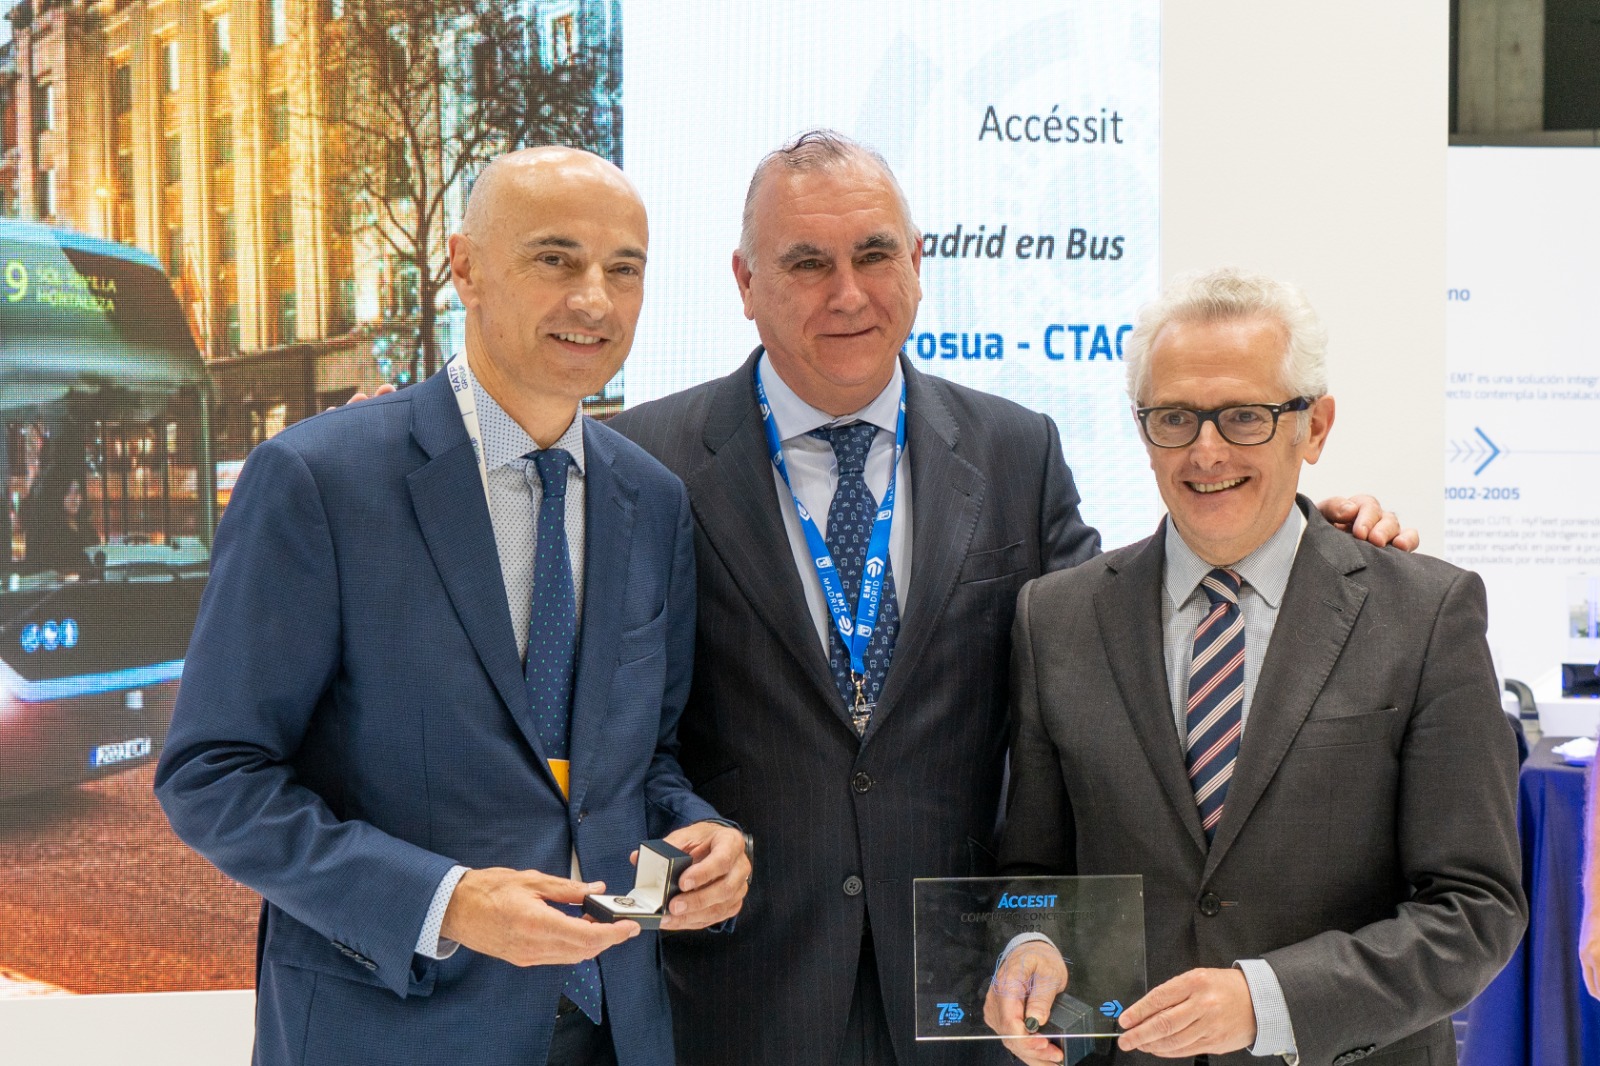 EMT gives an award to CTAG and Castrosua for their project “Vivir Madrid en Bus”